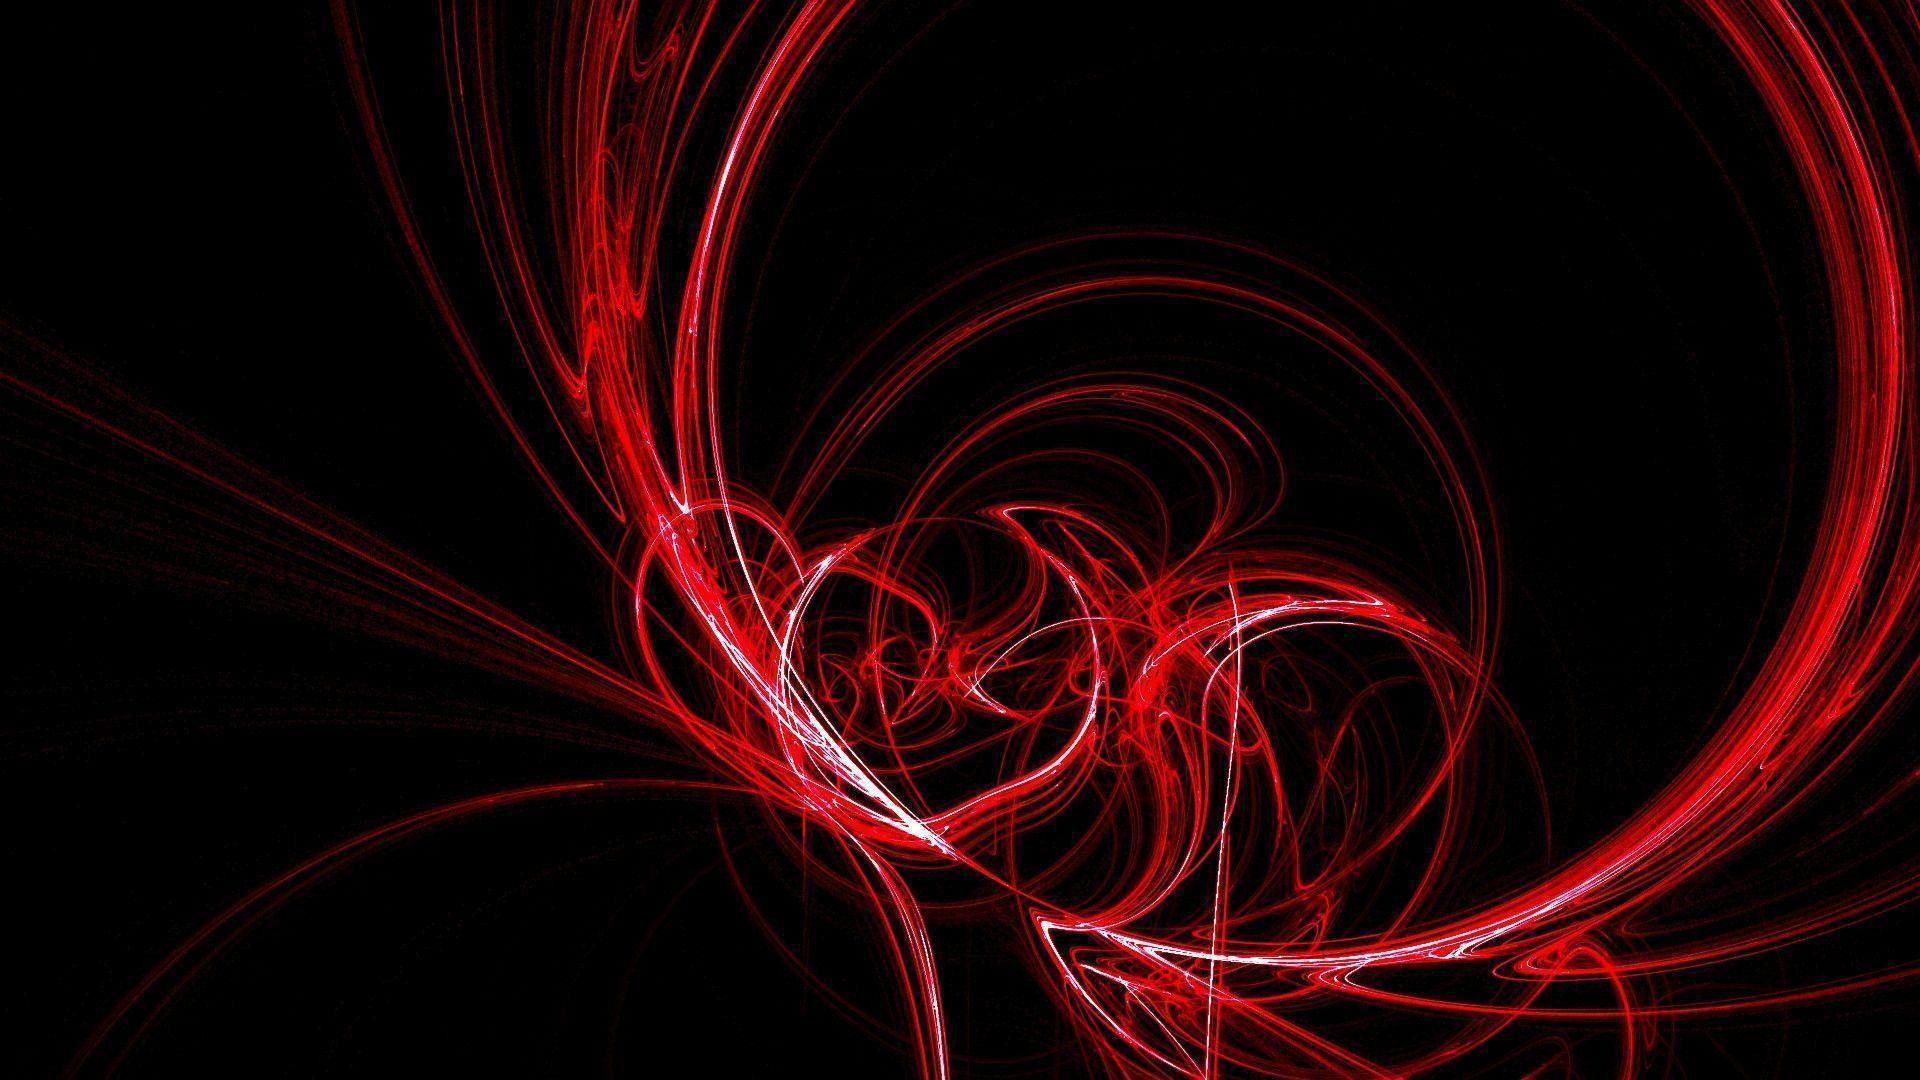 Black And Red Abstract Backgrounds 14760 Full HD Wallpapers Desktop